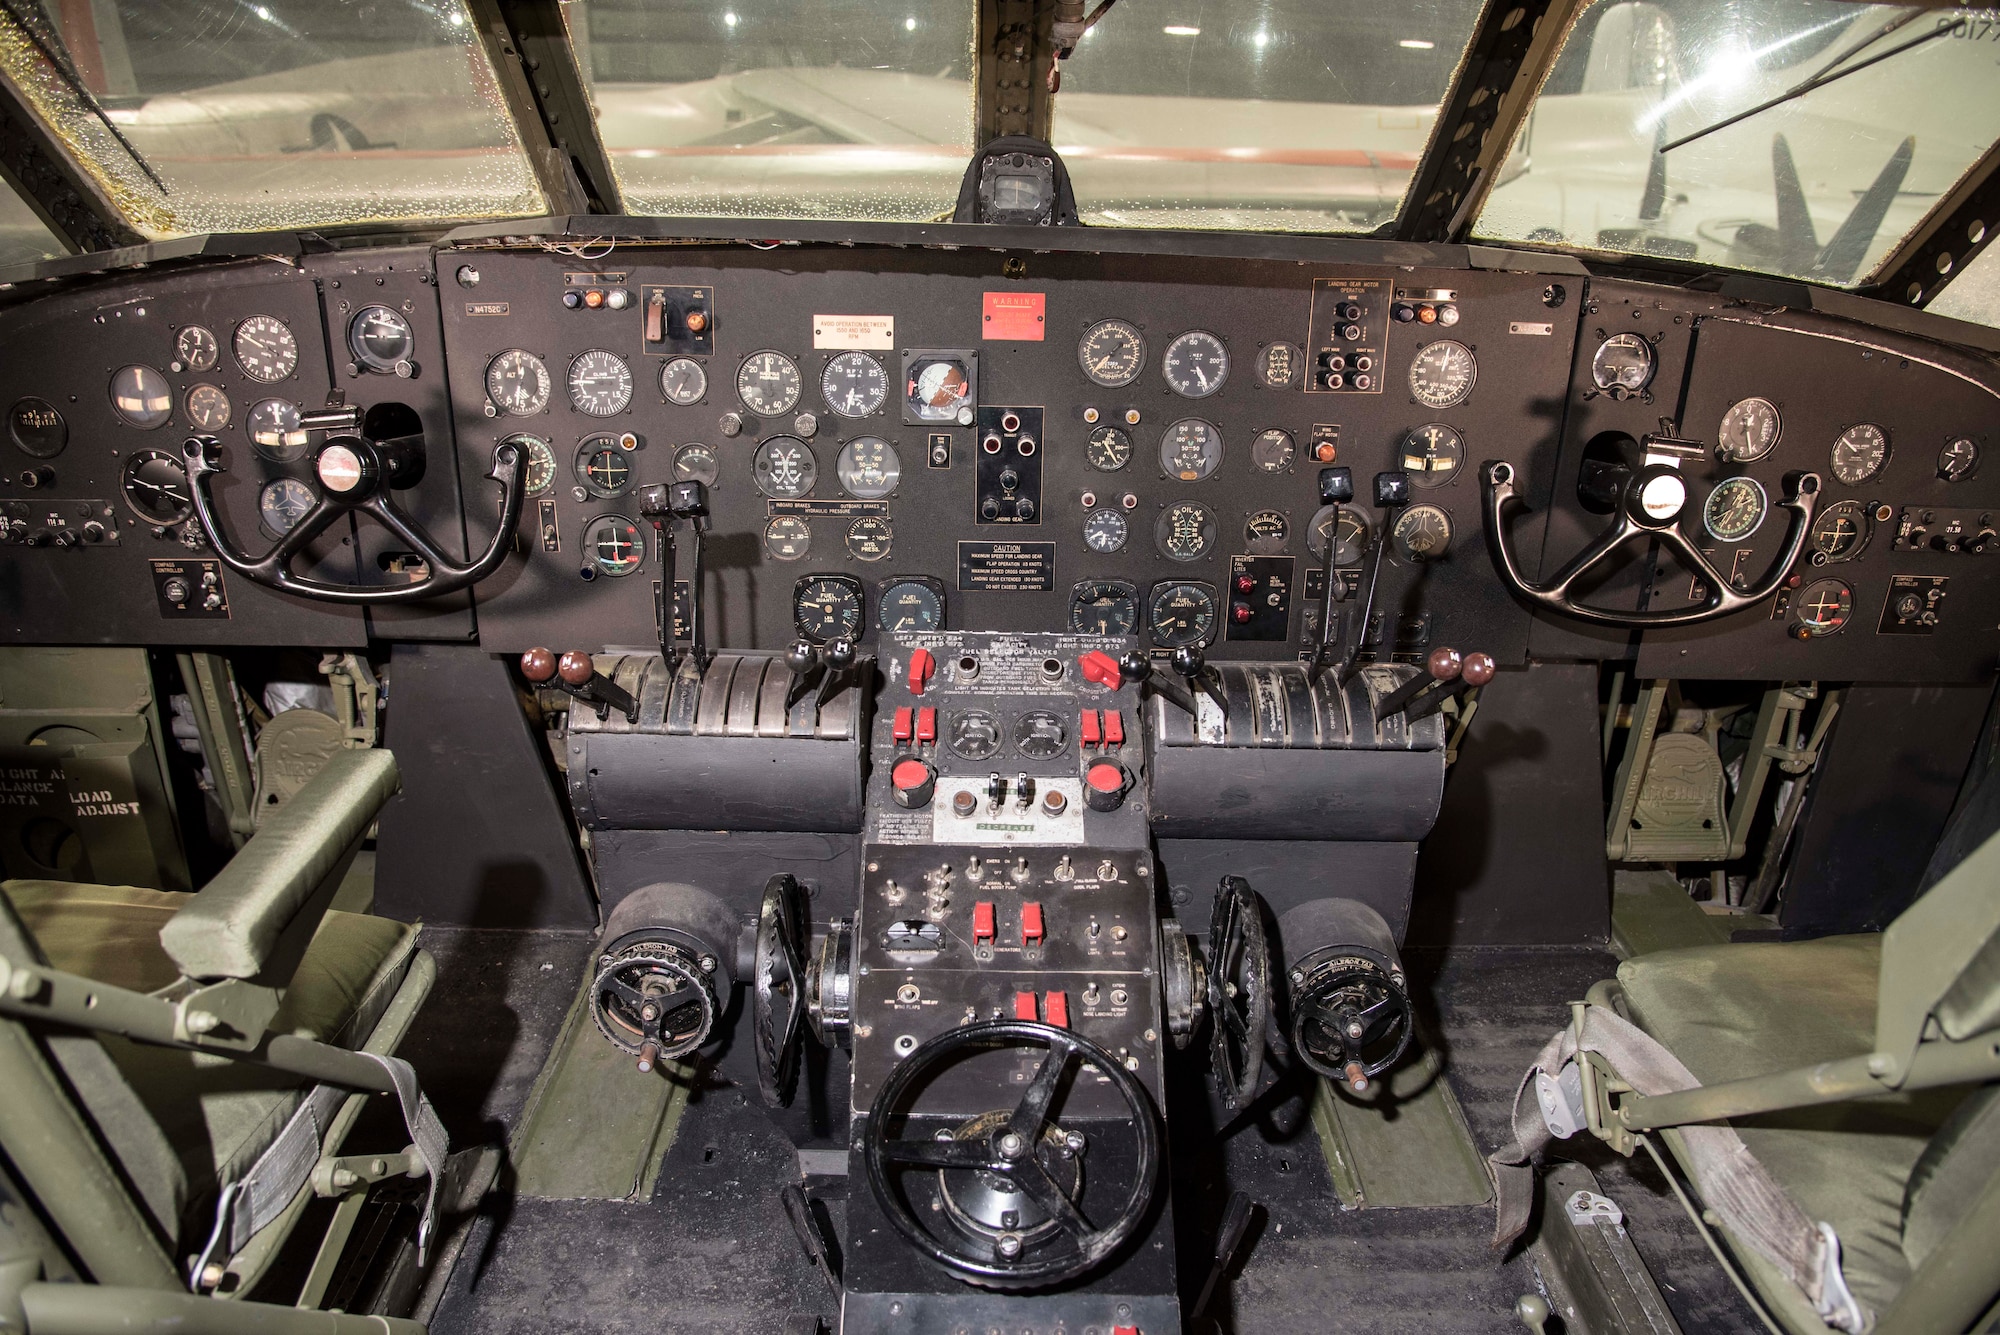 DAYTON, Ohio -- Fairchild C-82 Packet cockpit in the Global Reach Gallery at the National Museum of the United States Air Force. (U.S. Air Force photo by Ken LaRock)
